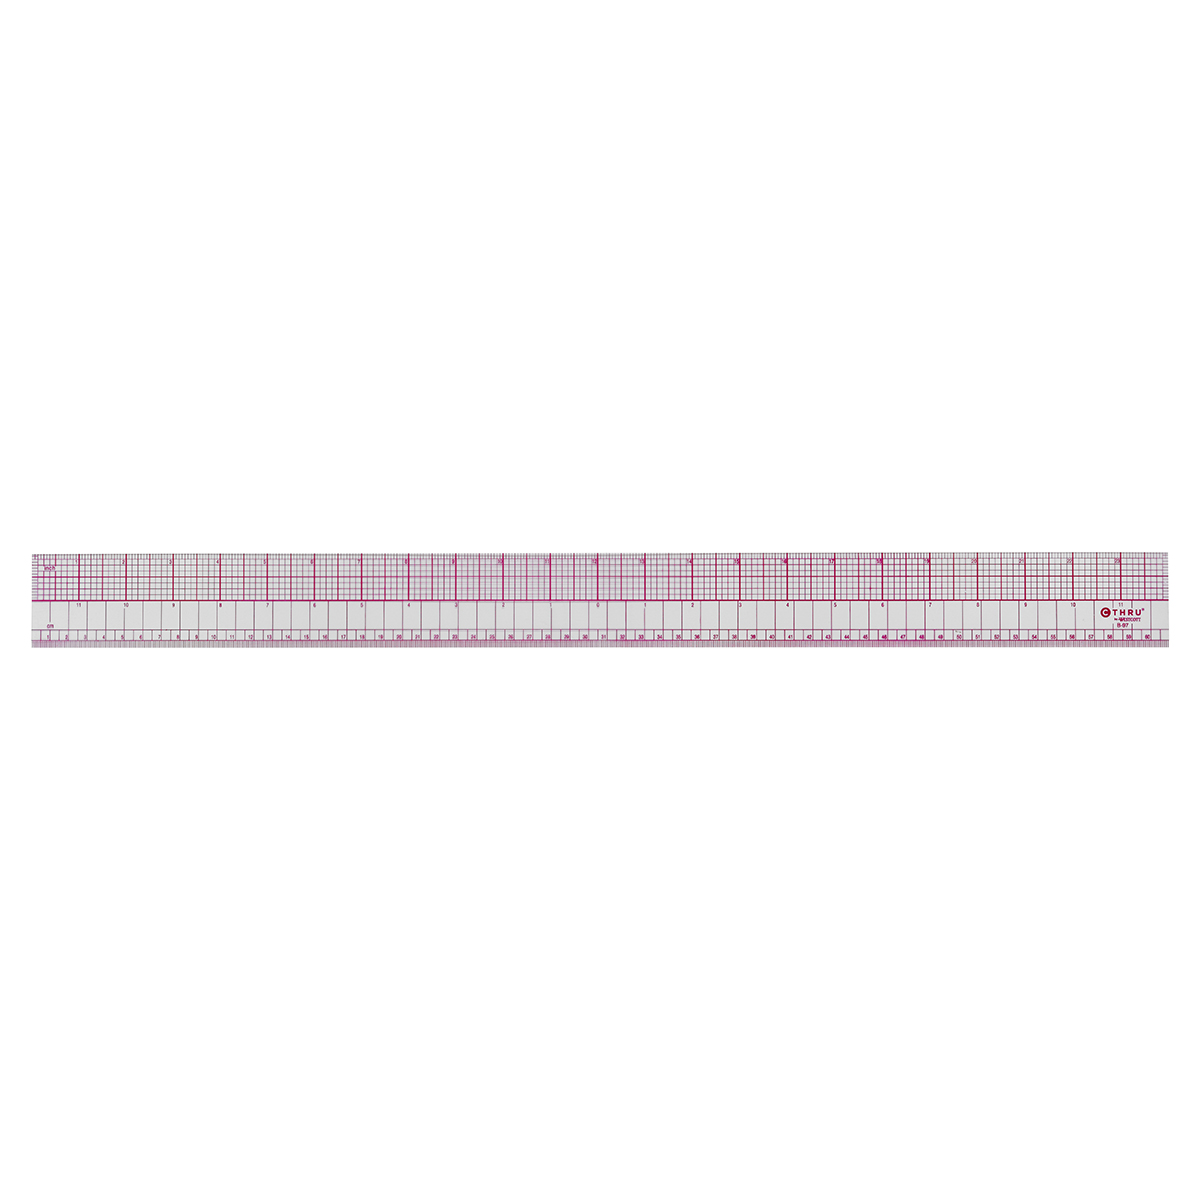 C-Thru Inch/Metric X-Ray Ruler. Inches broken down in 16ths. Overall Length 24"